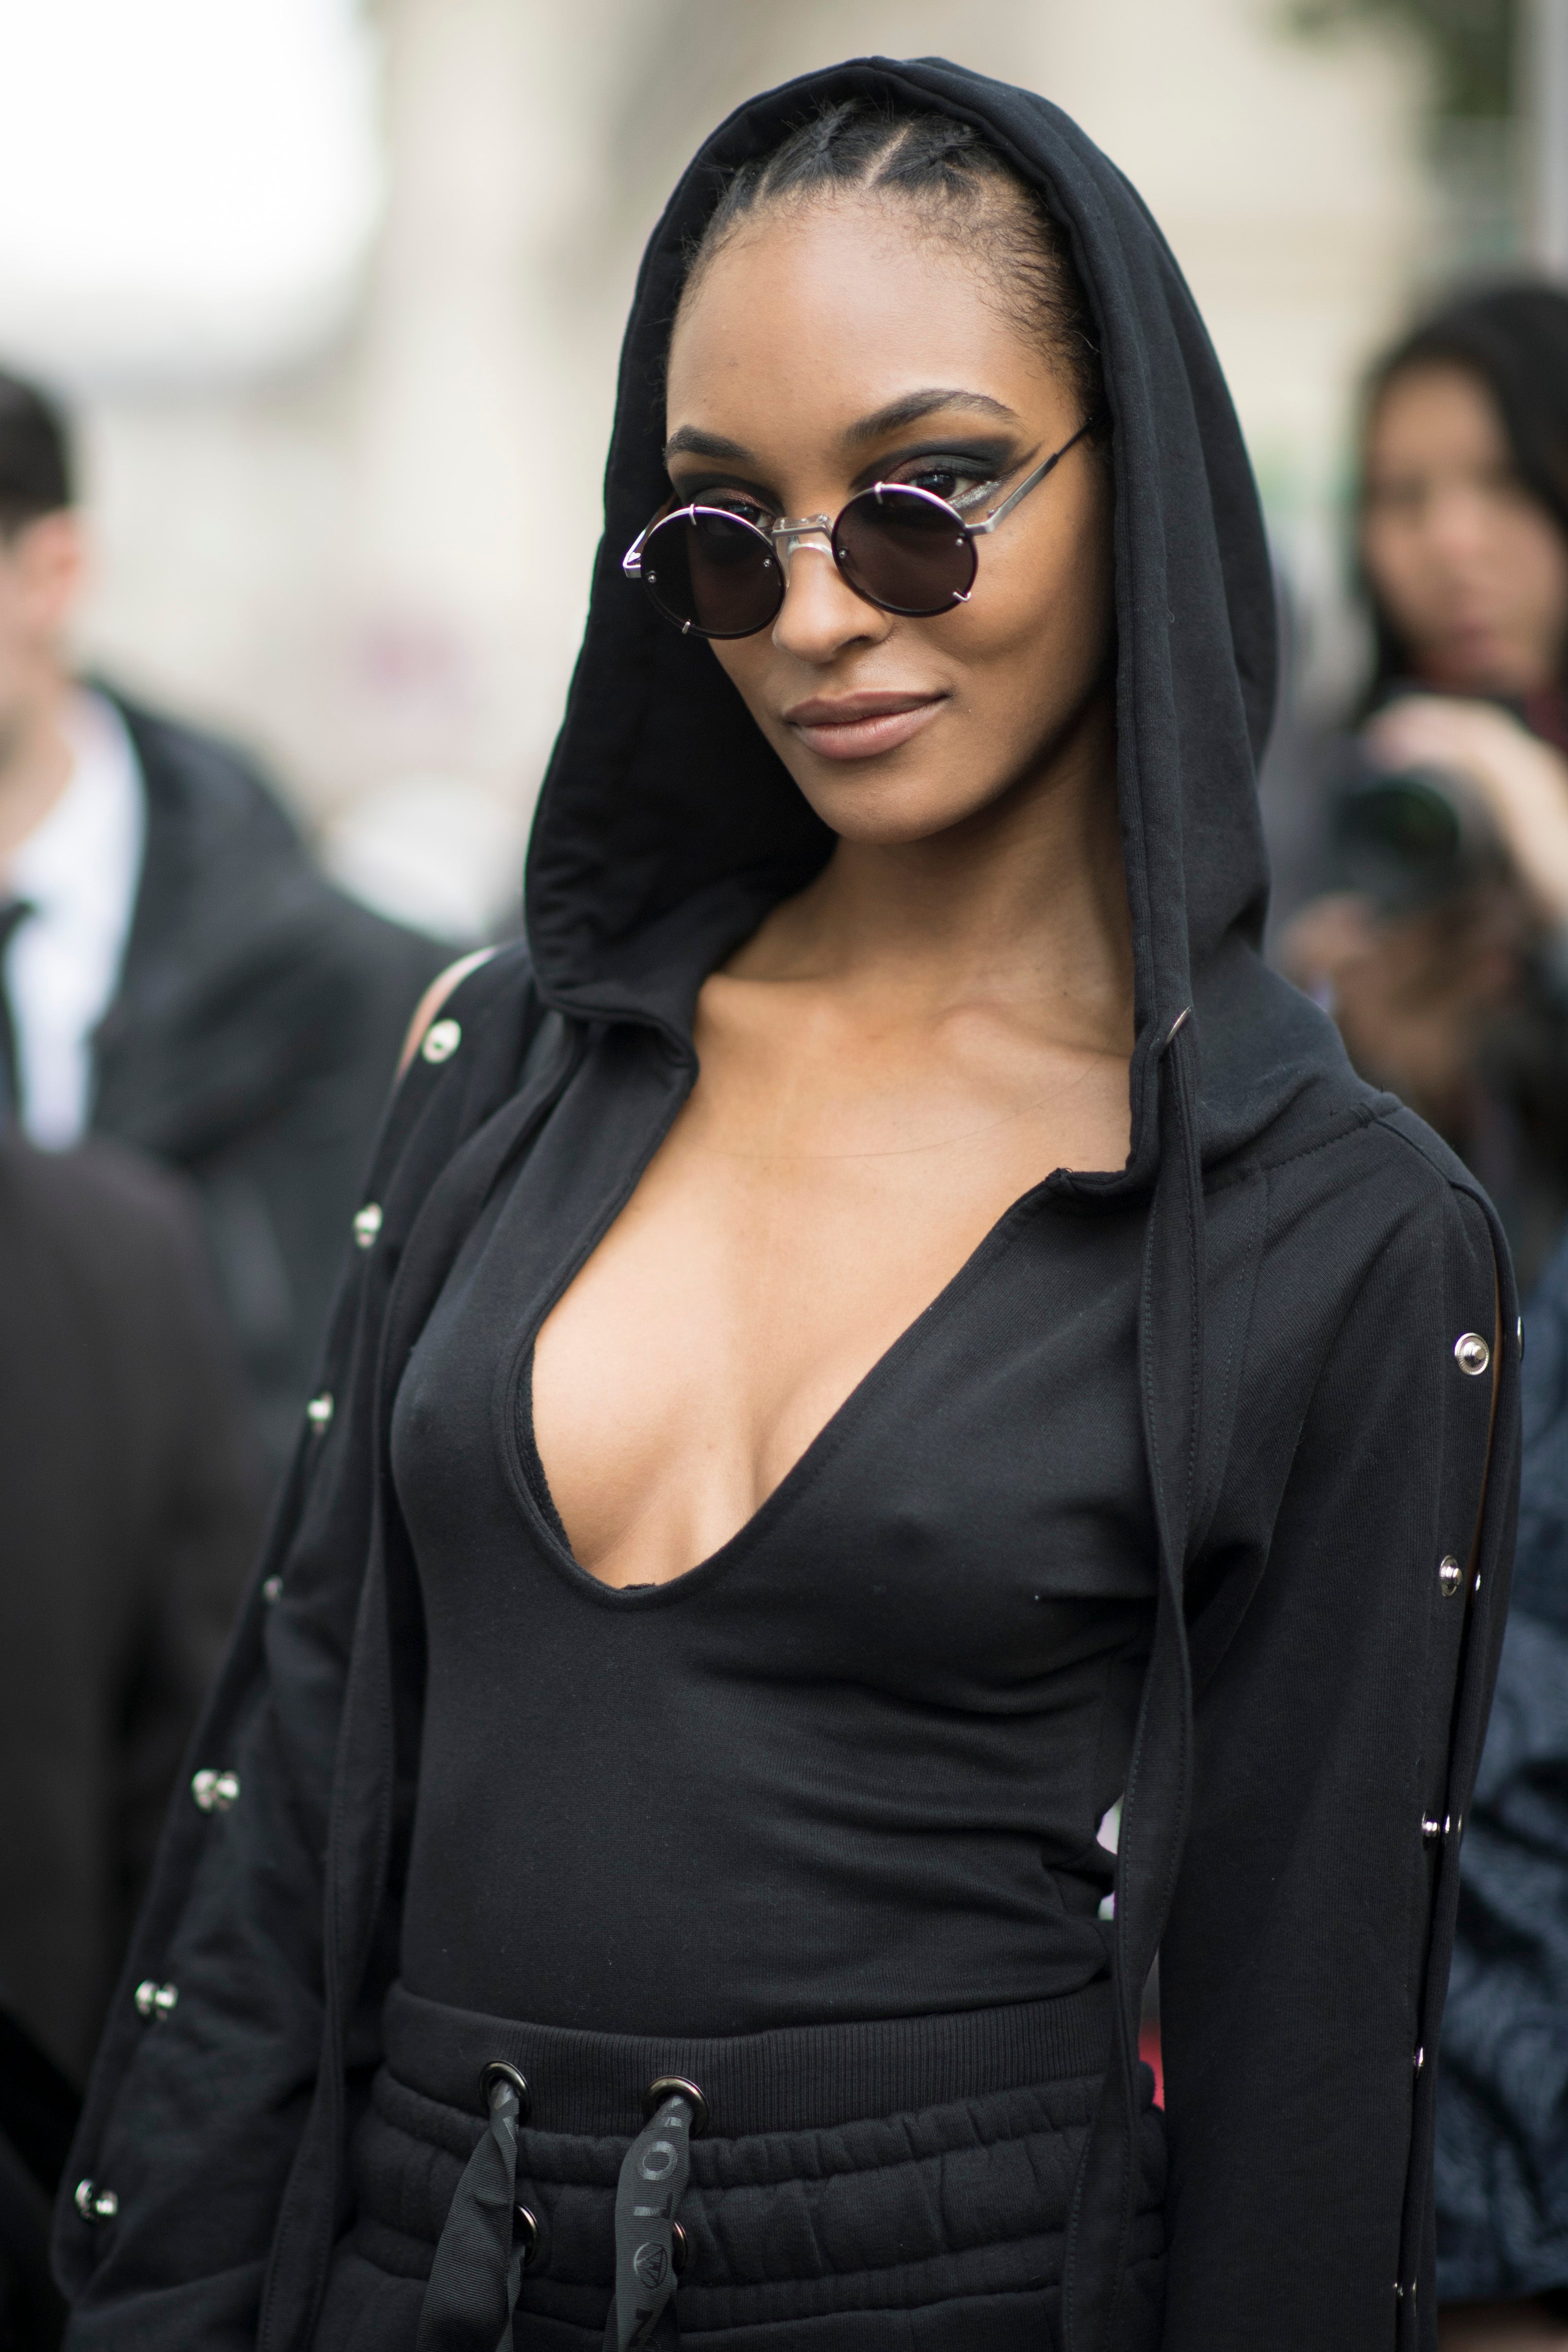 23 Times Jourdan Dunn Brought Her Supermodel Style to the Streets
